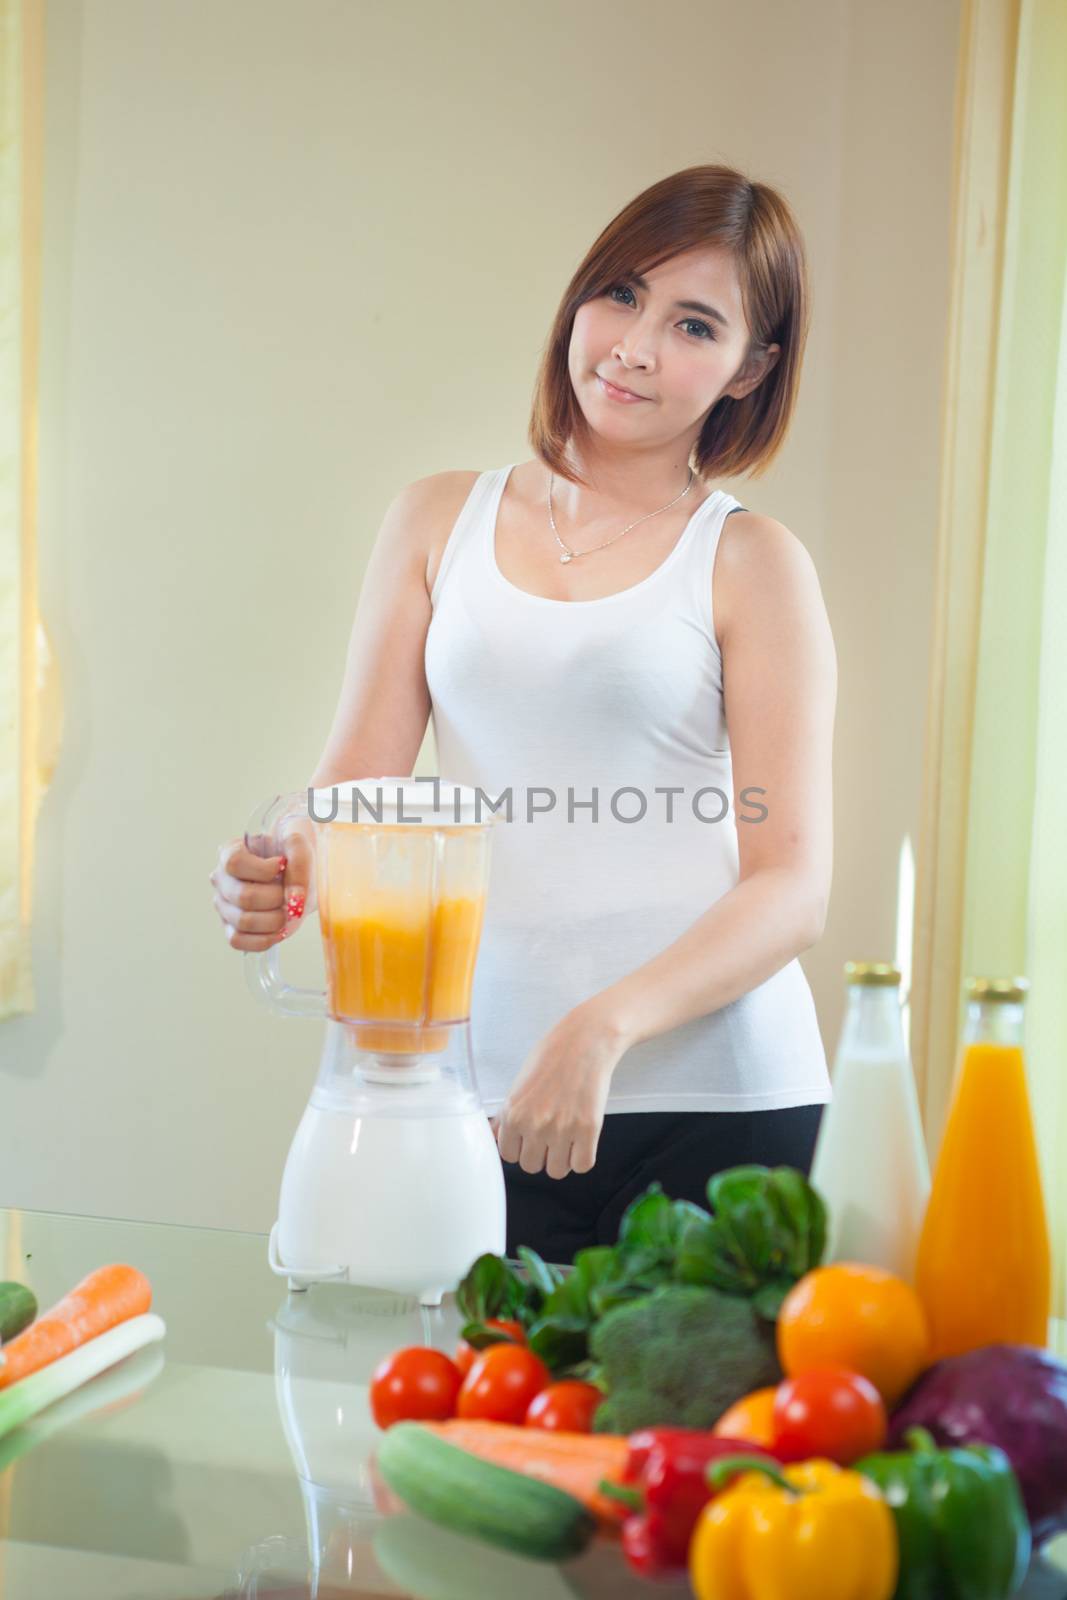 Beautiful Young Asian Woman Making Fruit Smoothie in Blender